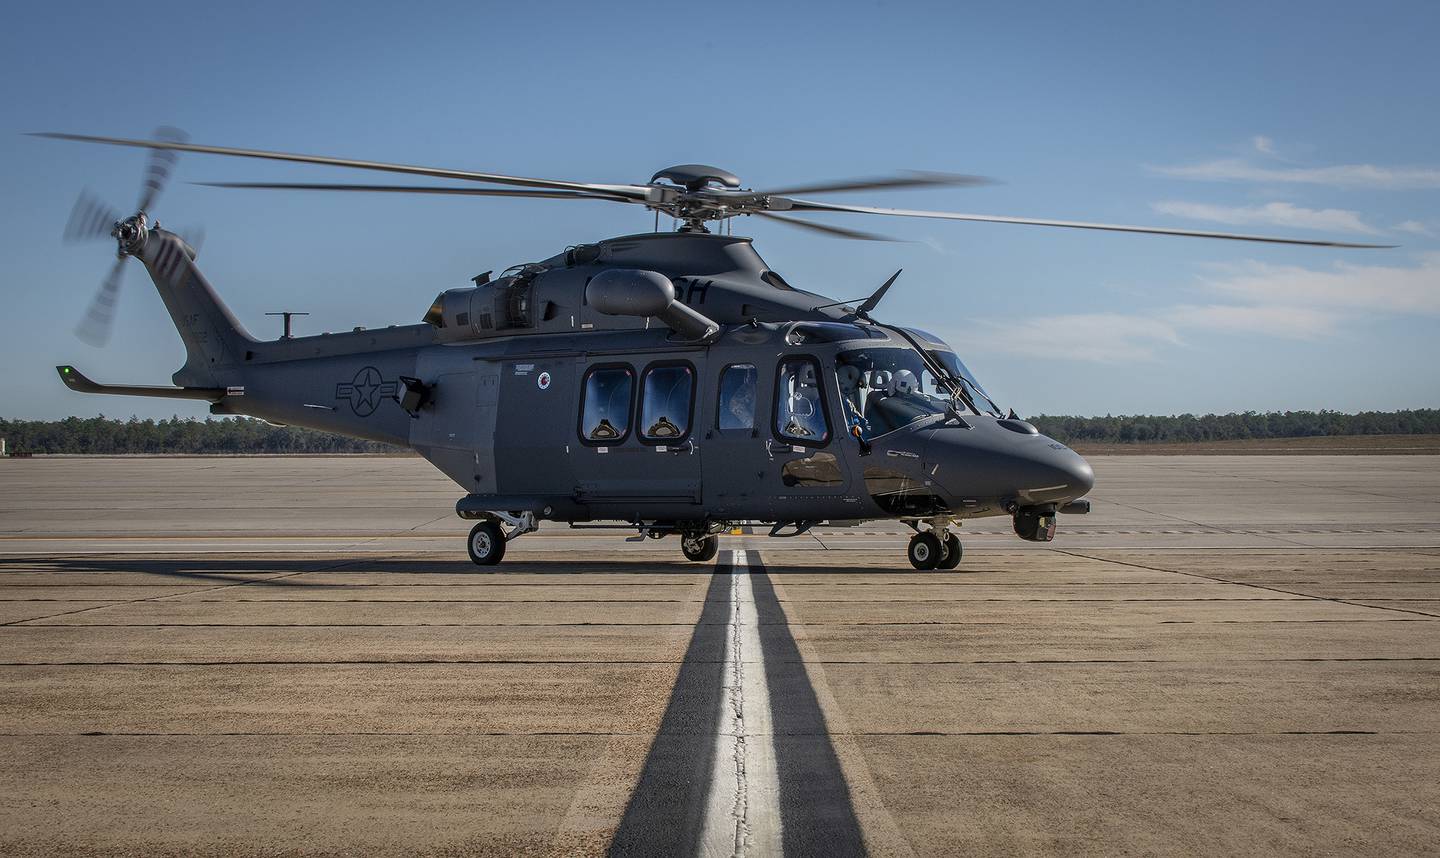 The MH-139A Grey Wolf was unveiled and named during the ceremony at Duke Field, Fla., Dec. 19, 2019.